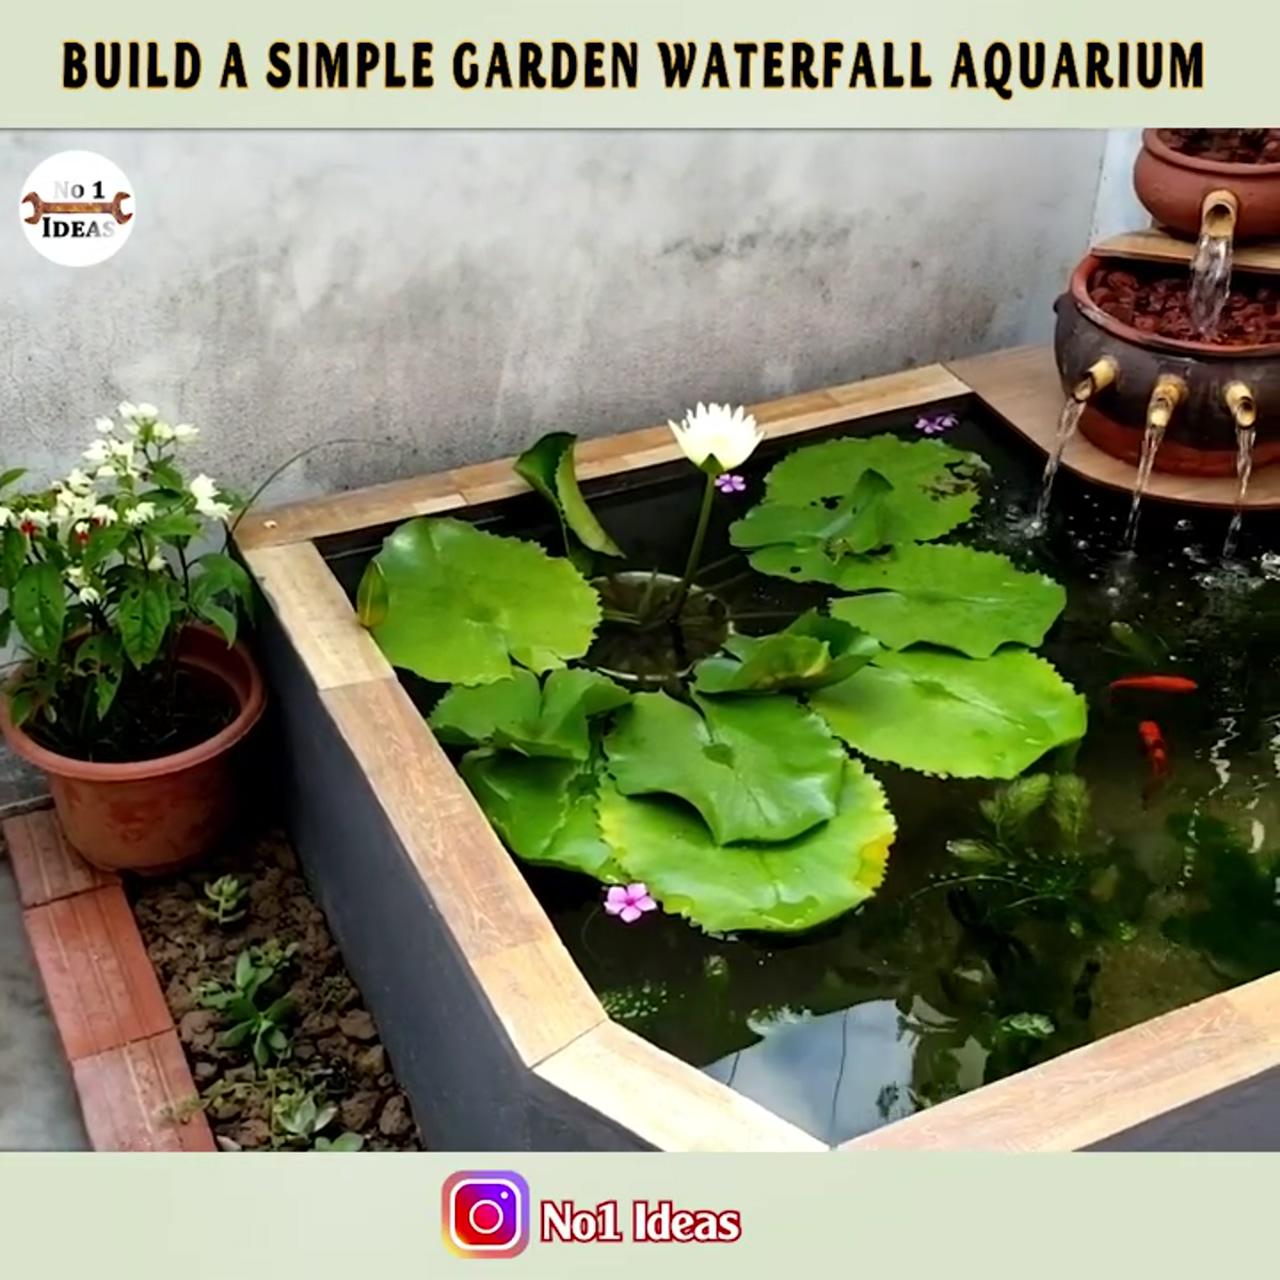 Build a simple garden waterfall aquarium for your family; tattoo. tattoo. homage. heavens door